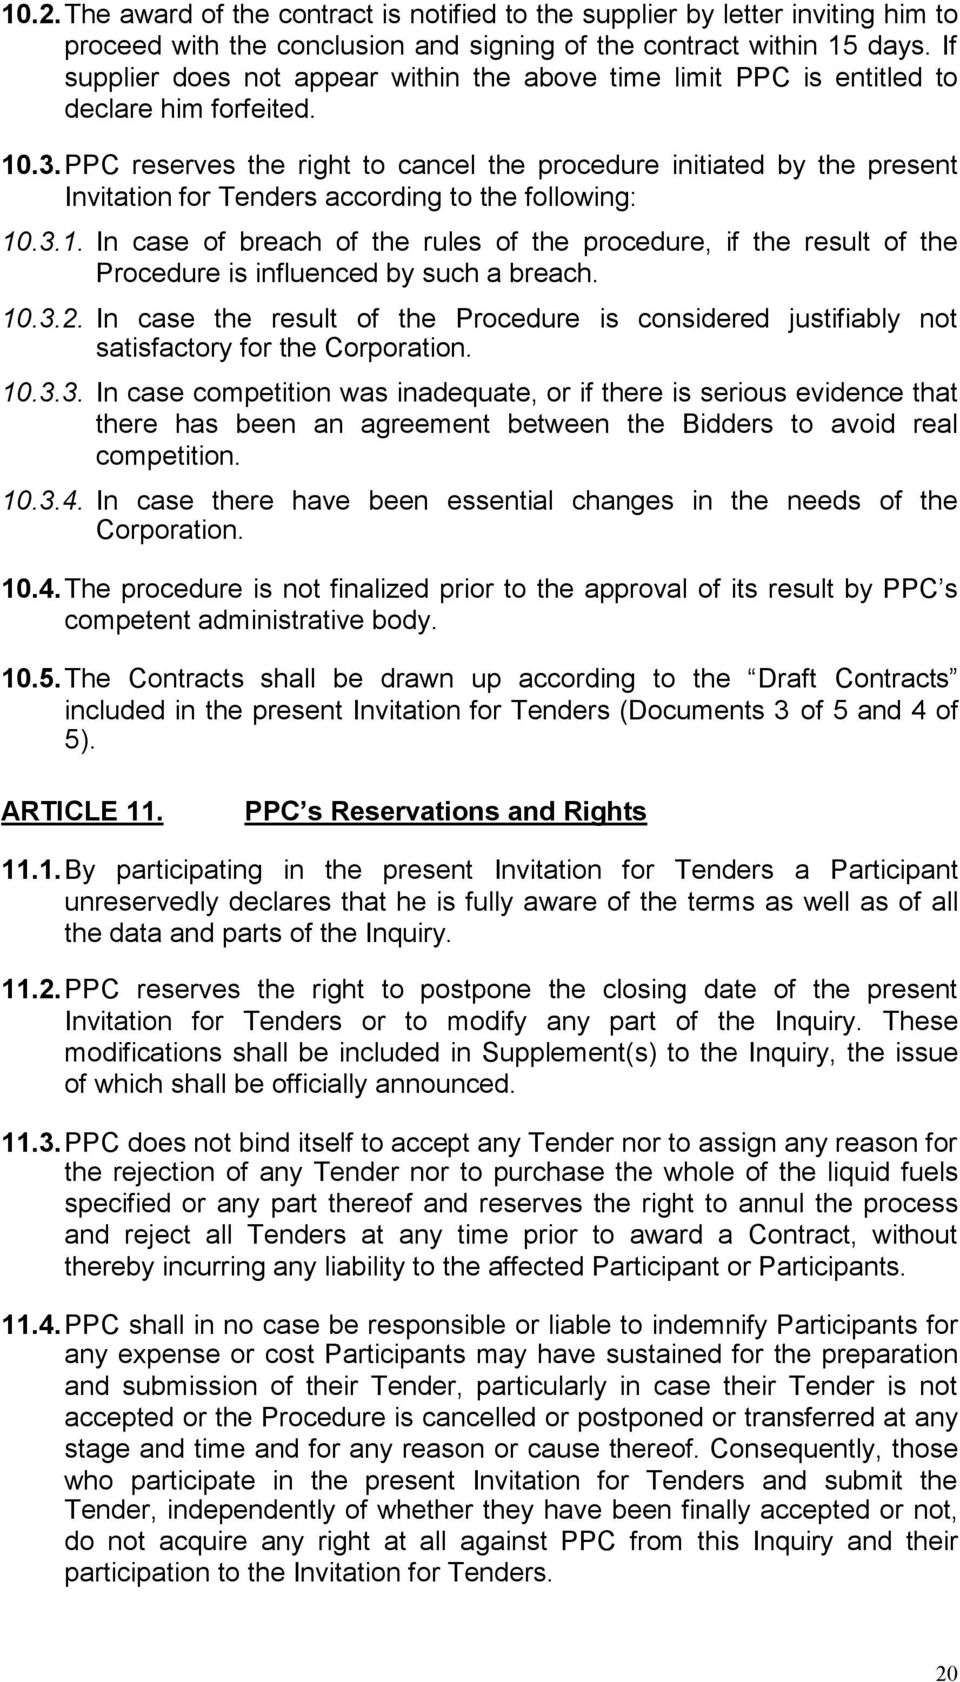 PPC reserves the right to cancel the procedure initiated by the present Invitation for Tenders according to the following: 10